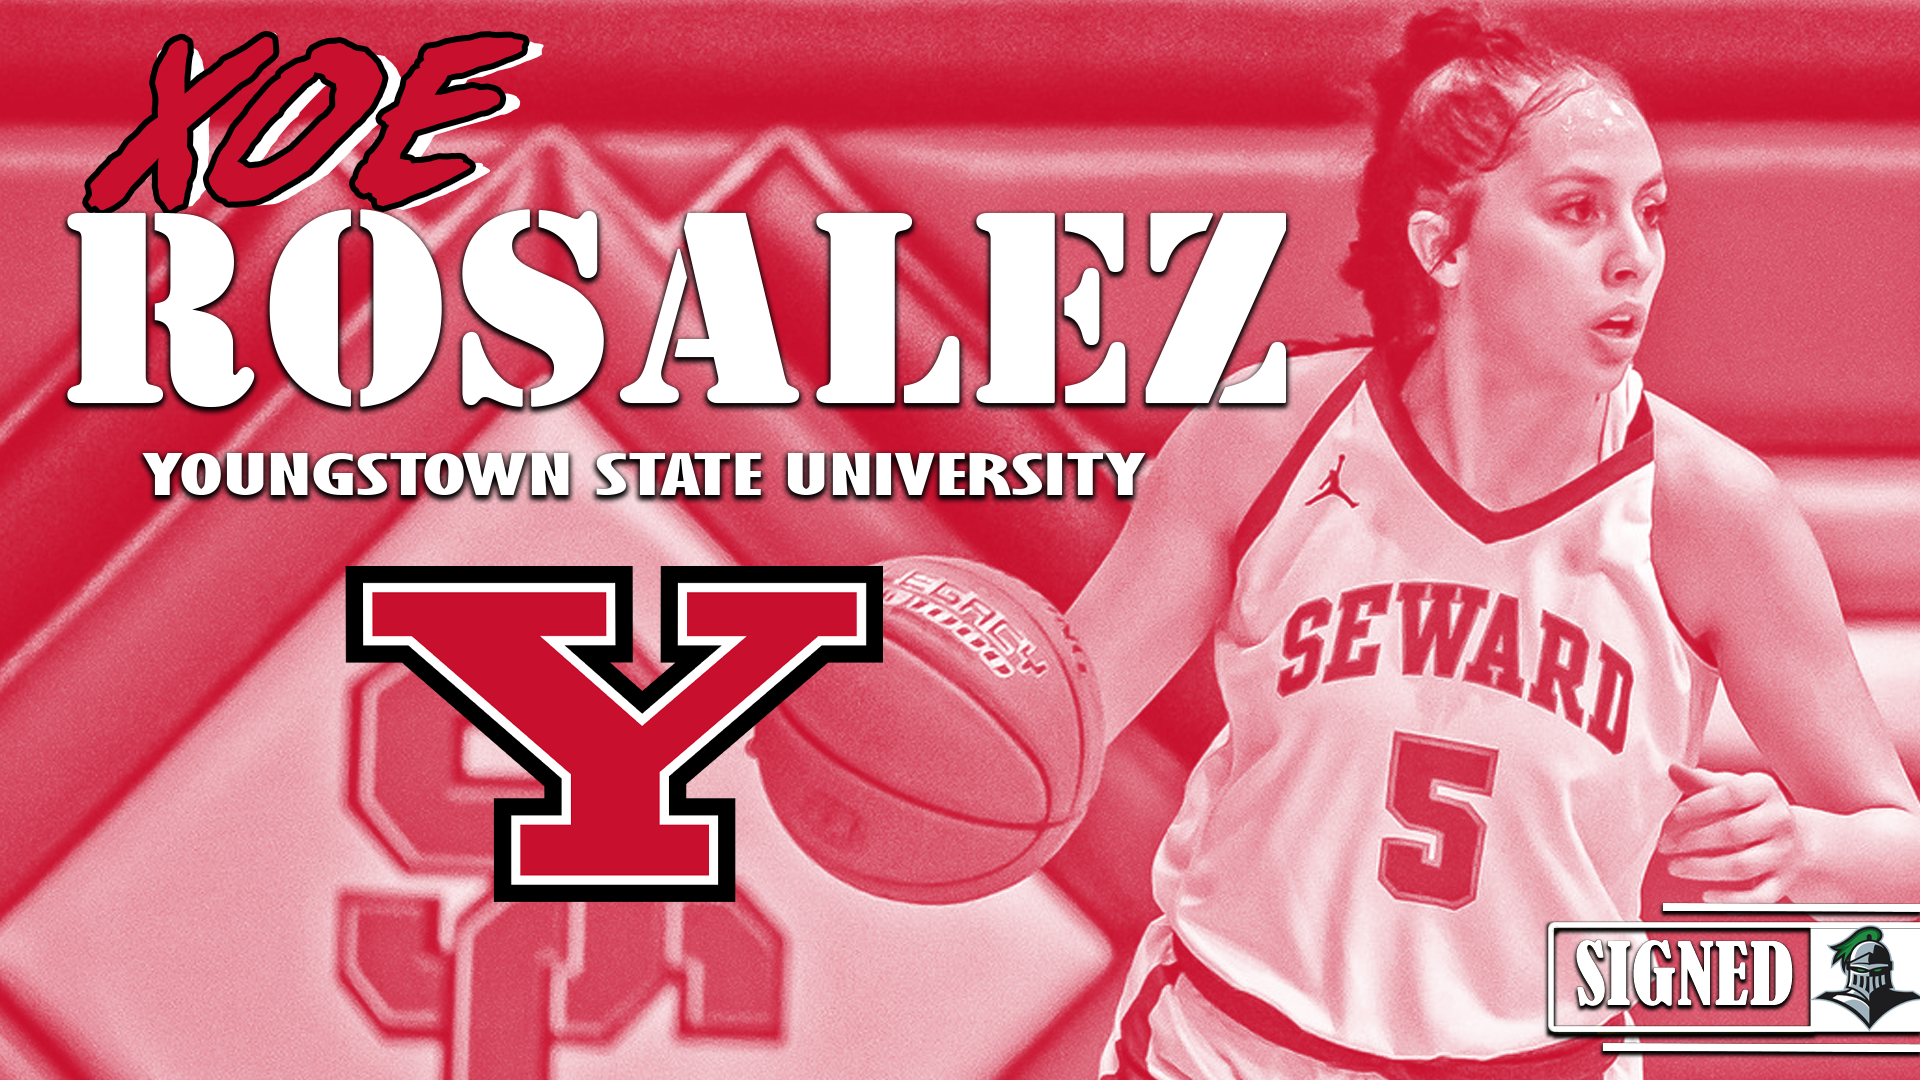 Rosalez Signs to go Division 1 with Youngstown State